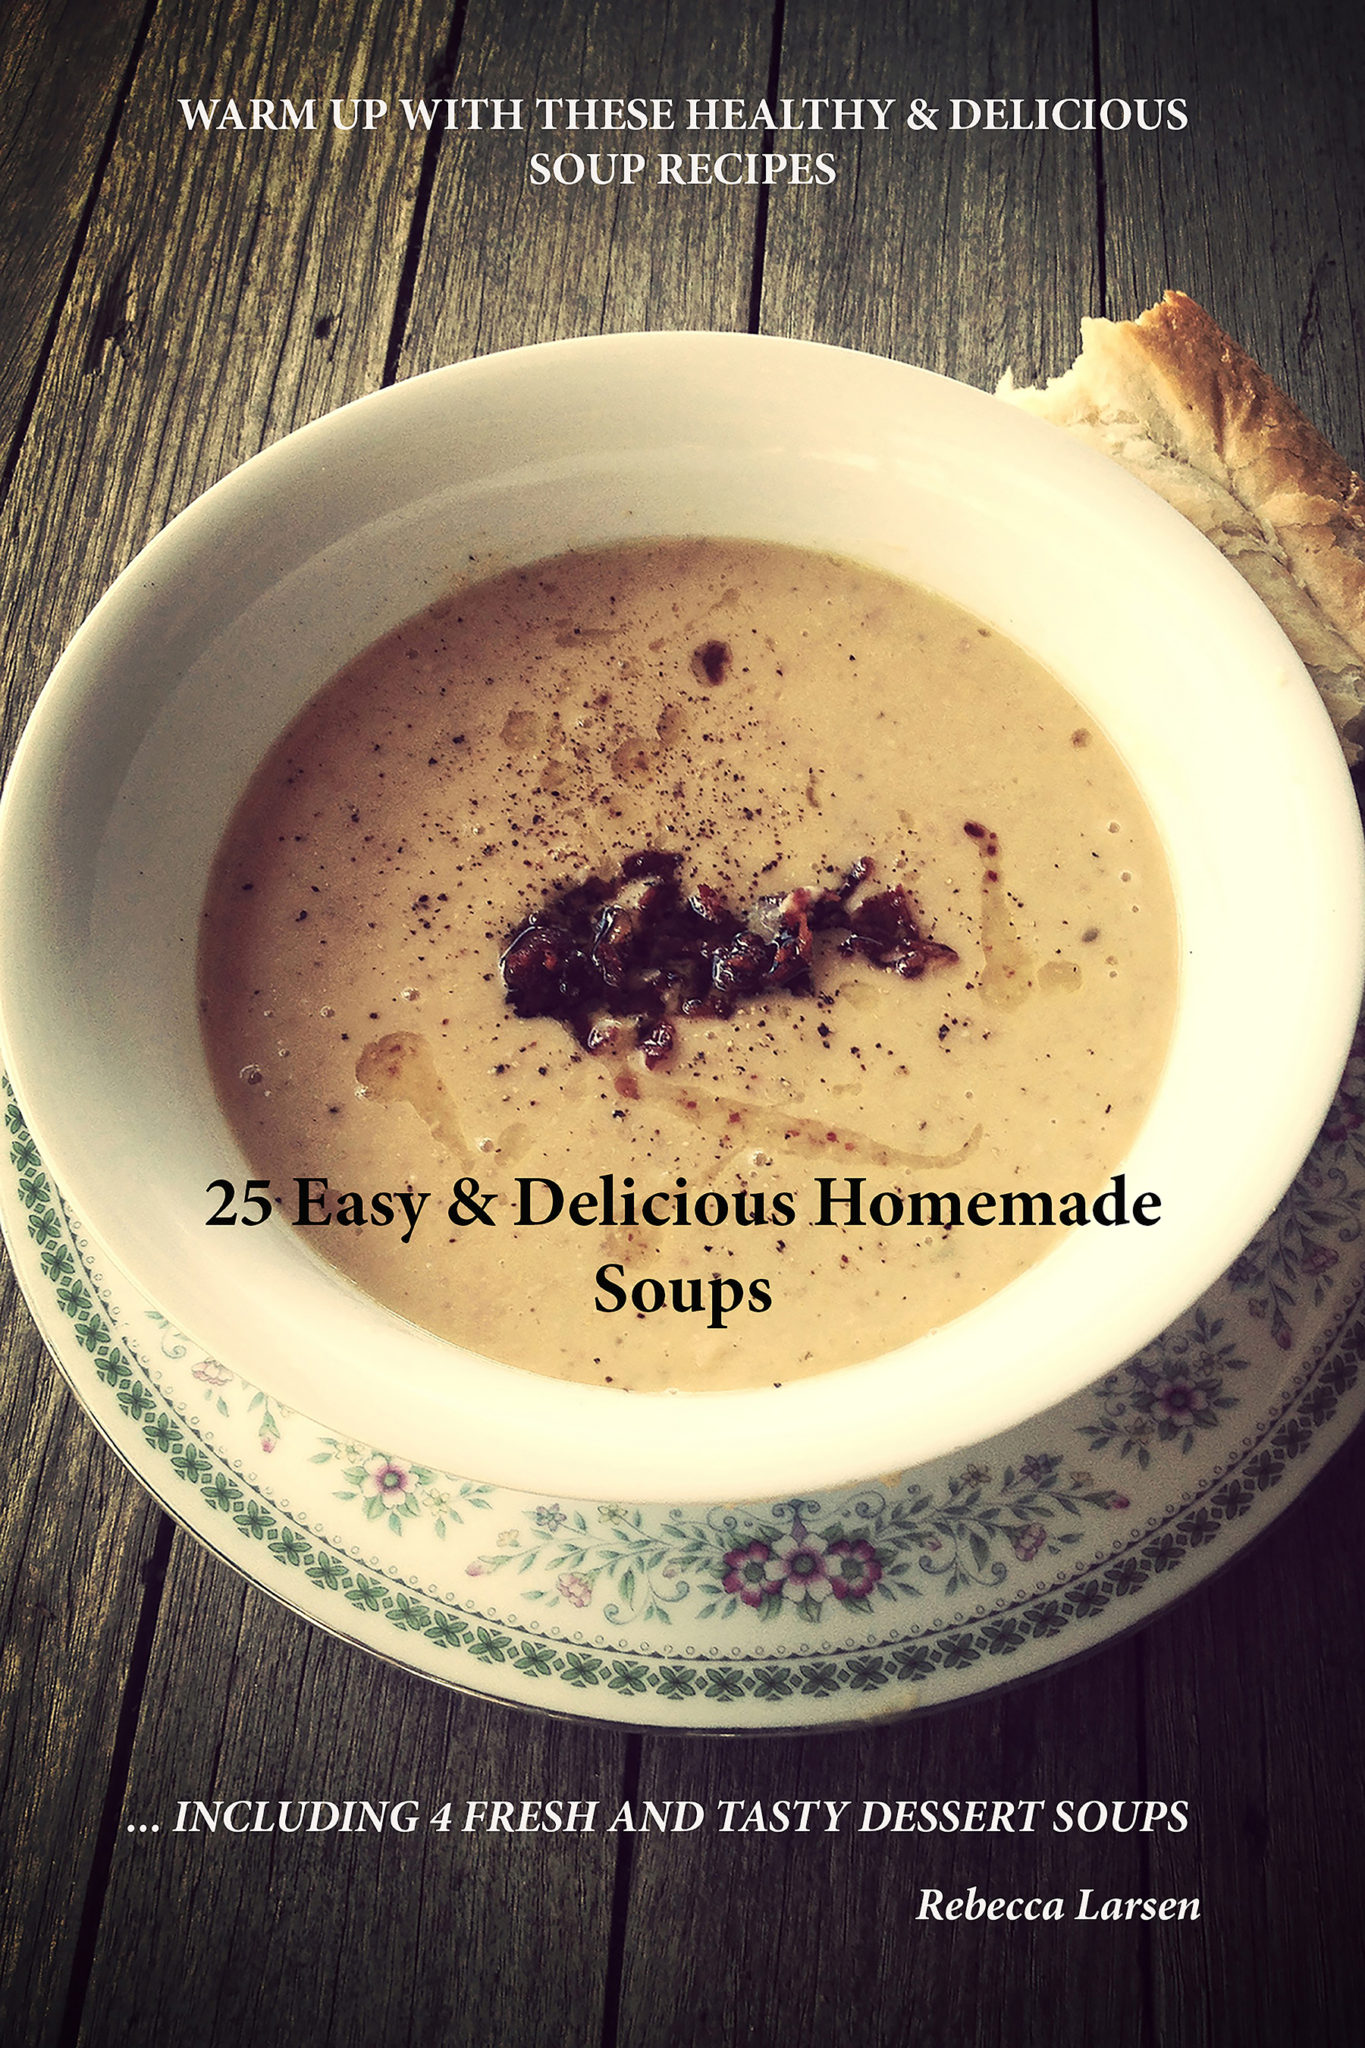 FREE: 25 EASY & DELICIOUS HOMEMADE SOUPS by Rebecca Larsen